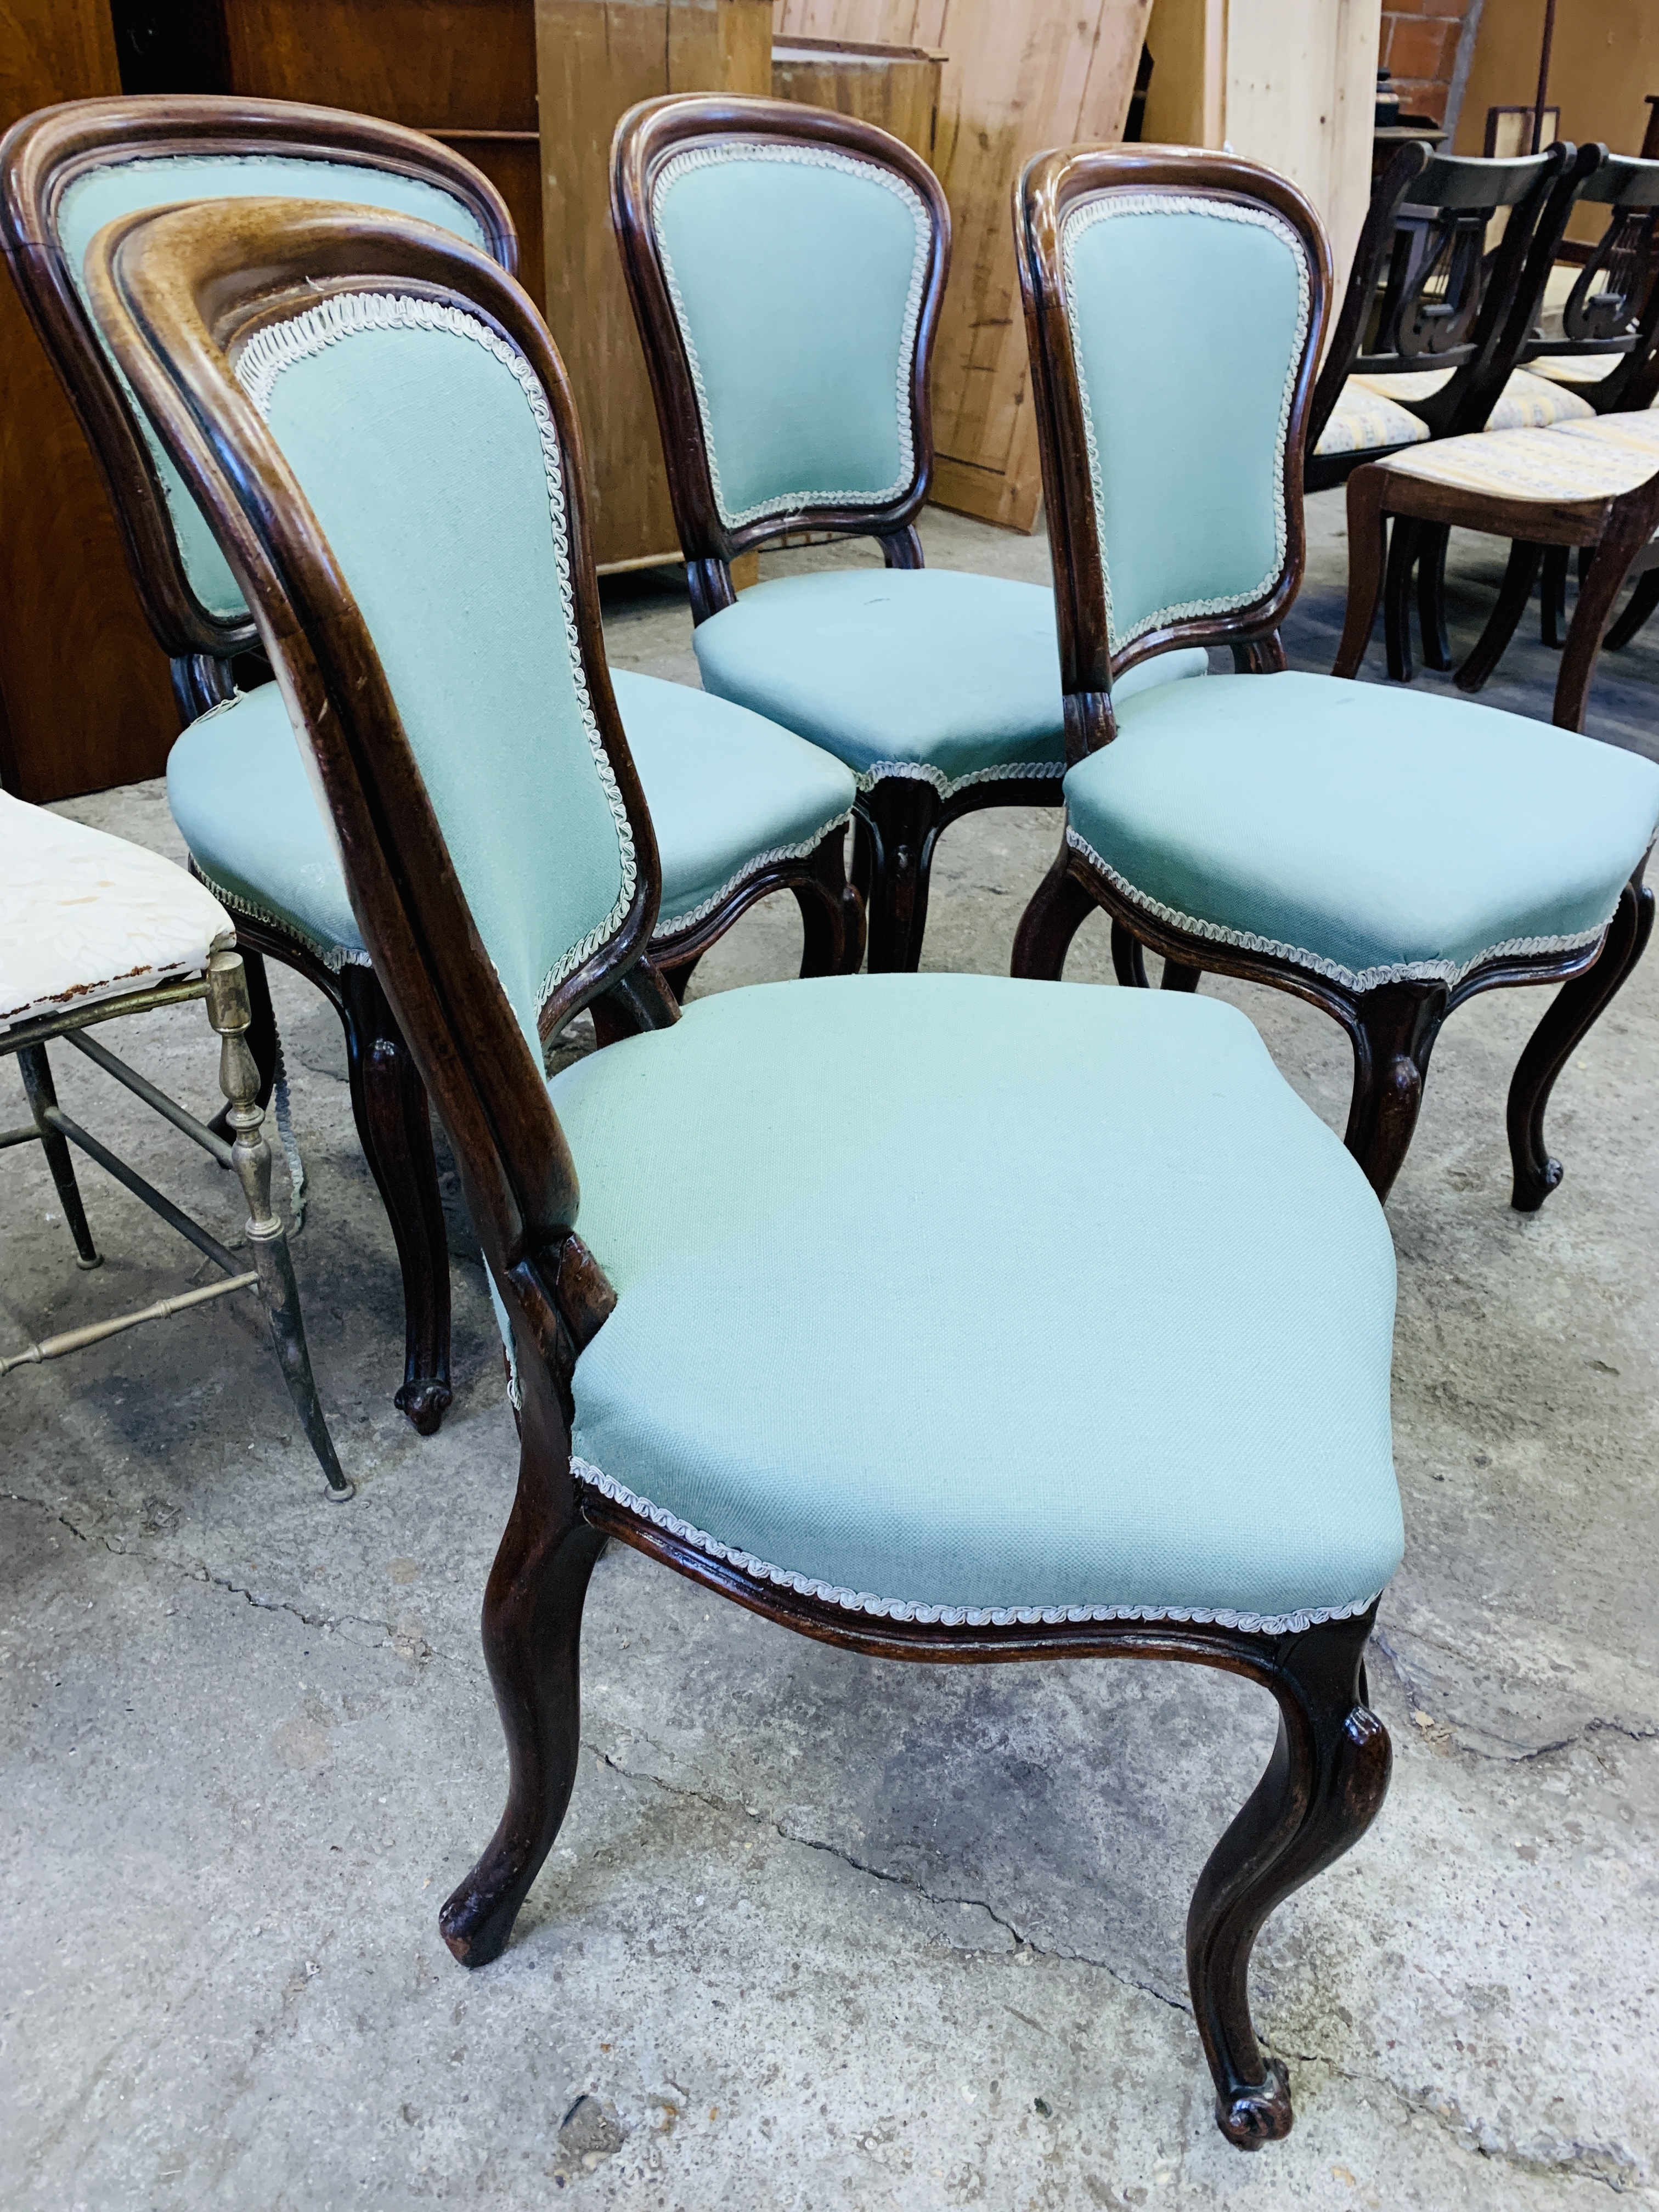 Four mahogany dining chairs - Image 2 of 4